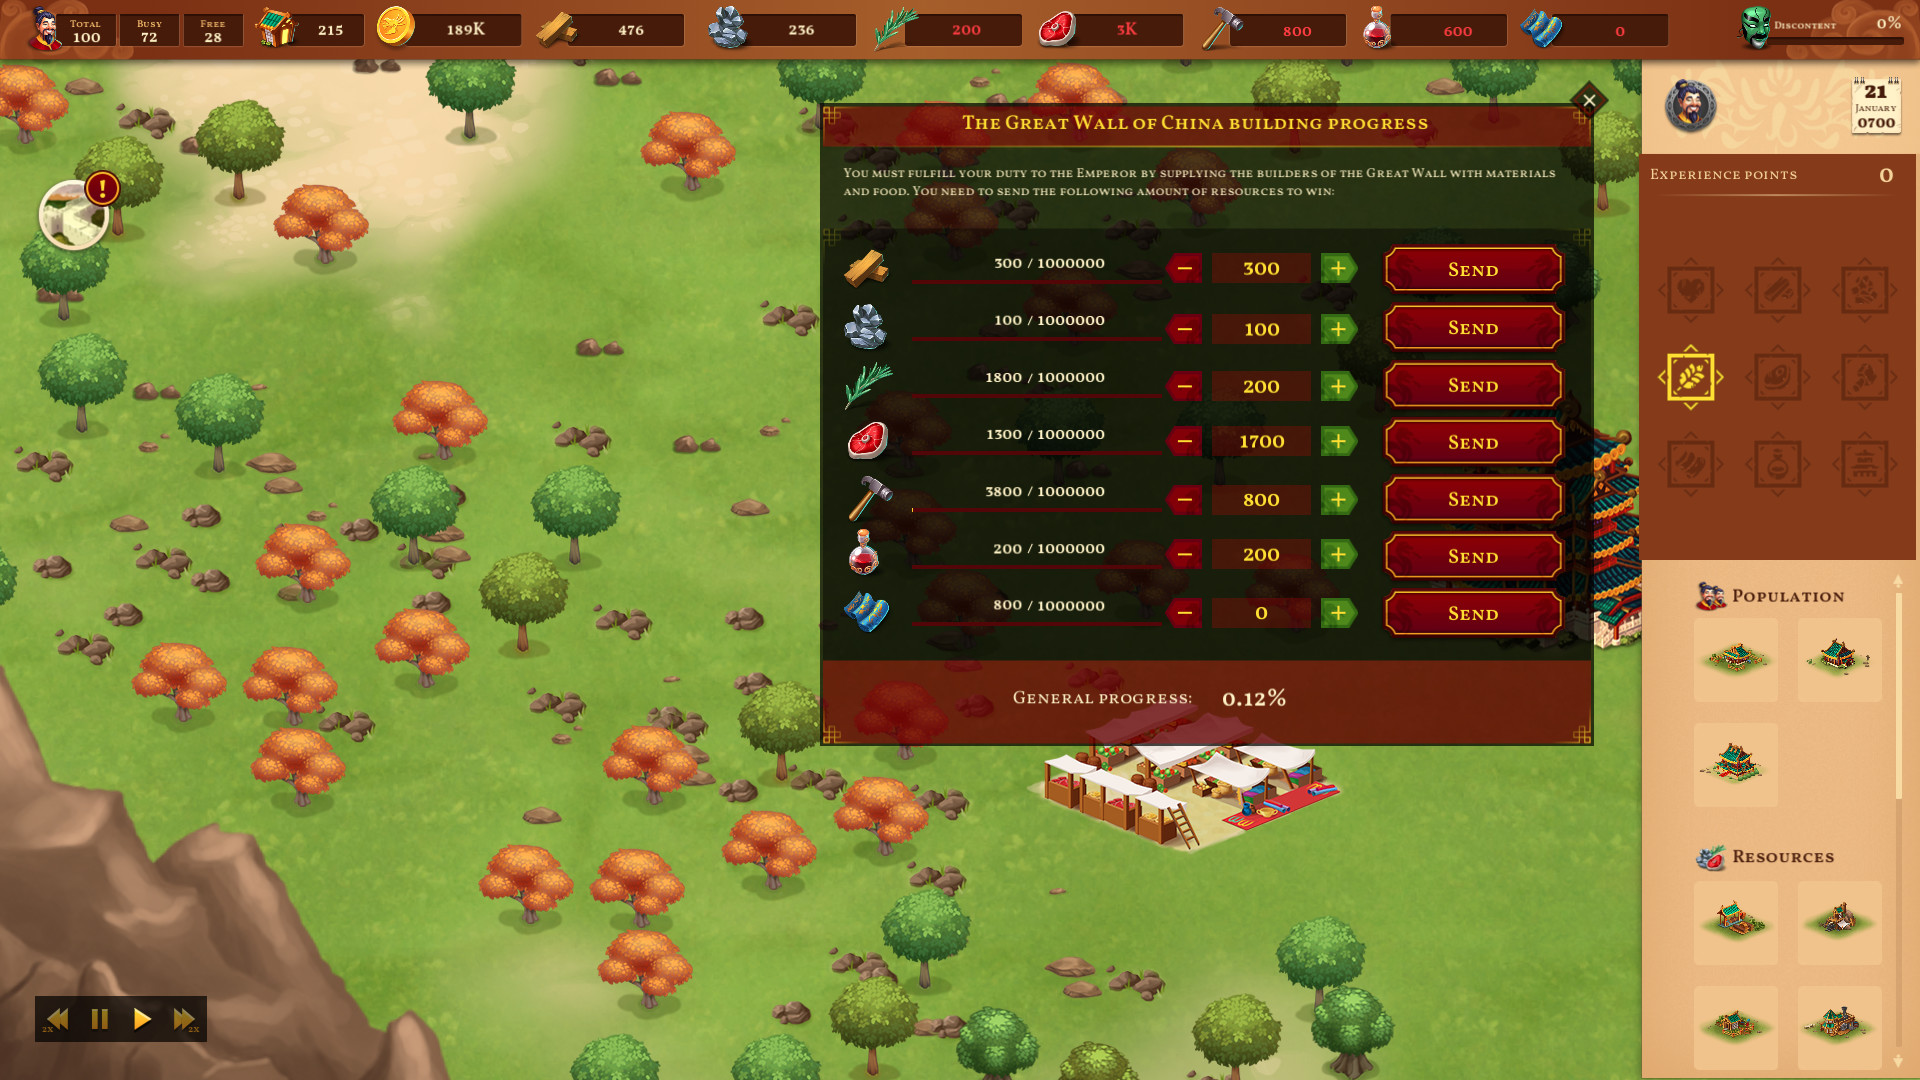 City Of Jade: Imperial Frontier Free Download